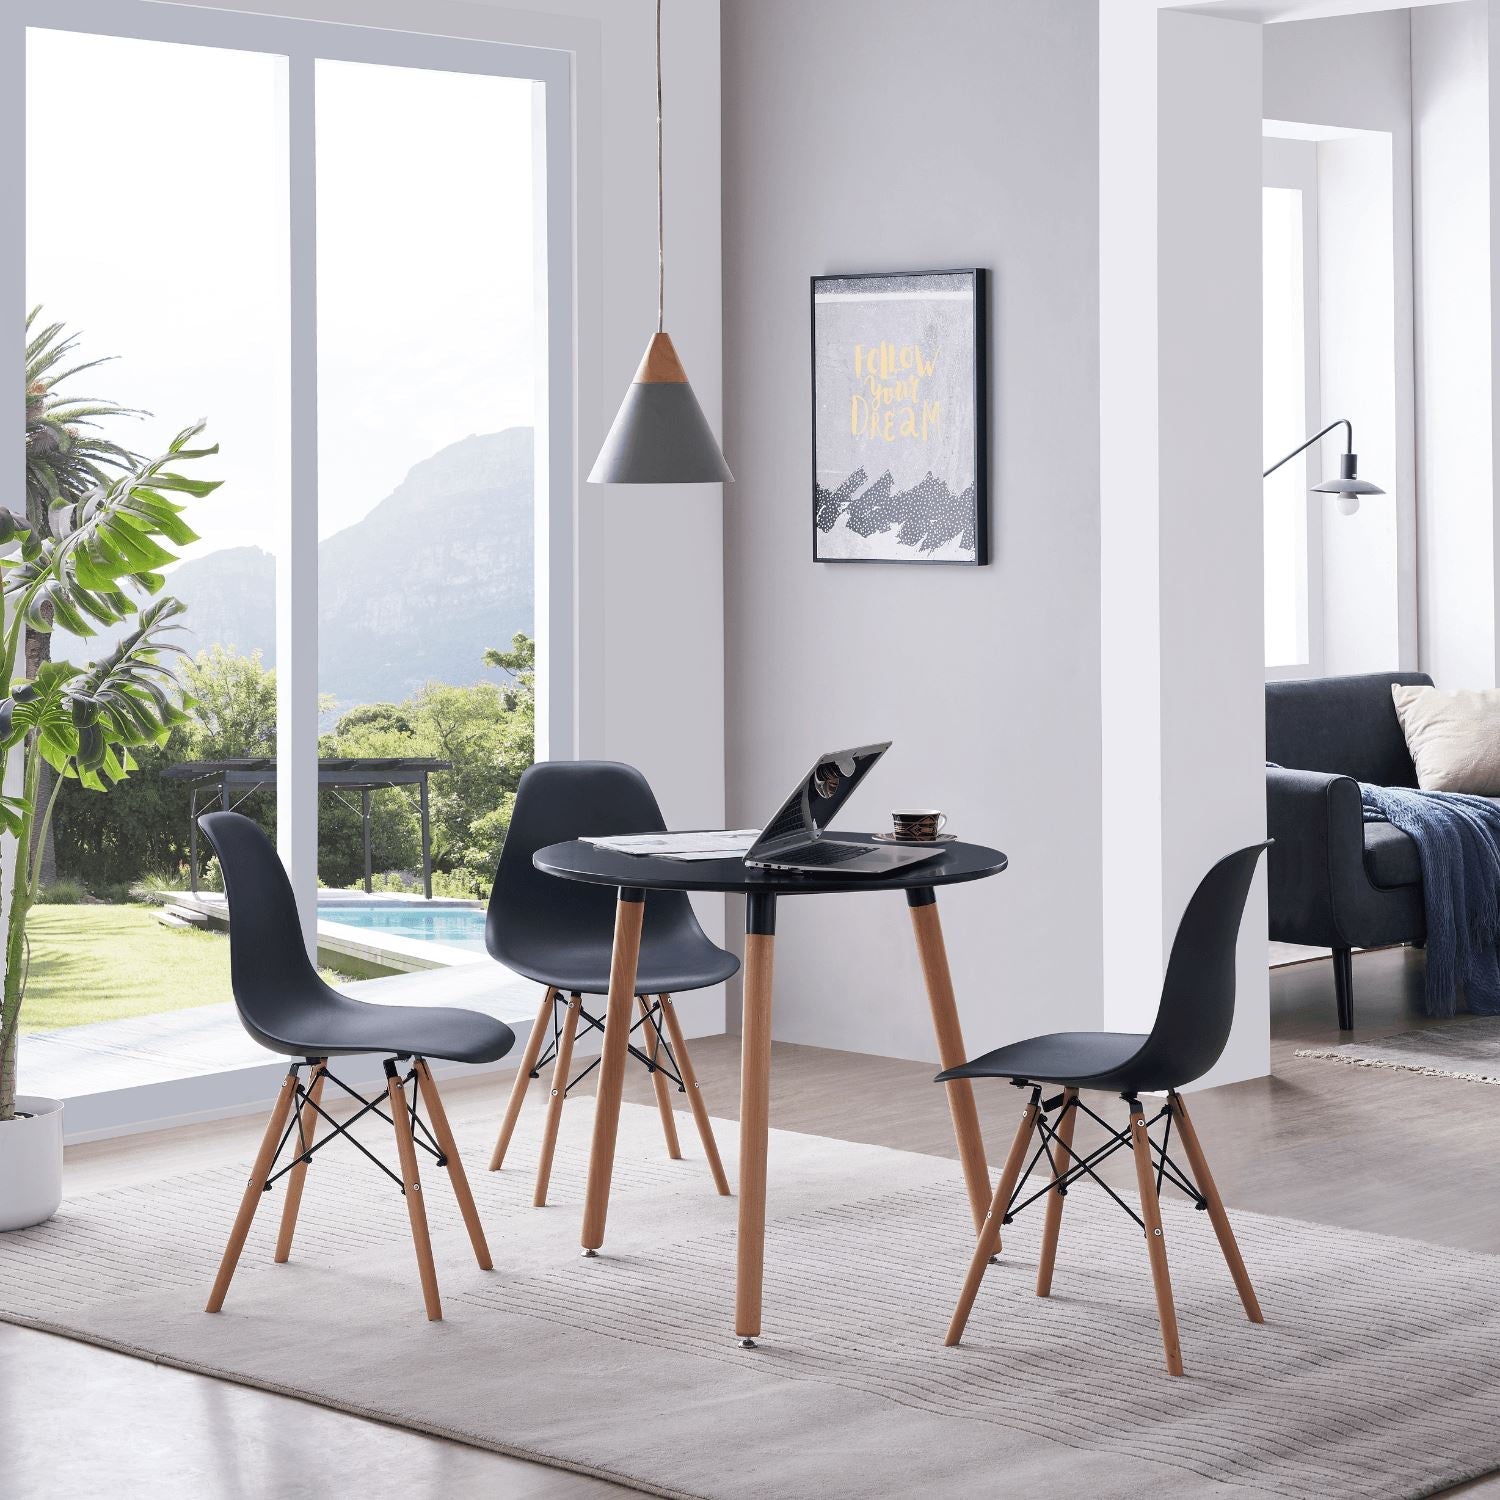 Valmes Chair - Set of 4 | Valyou Furniture